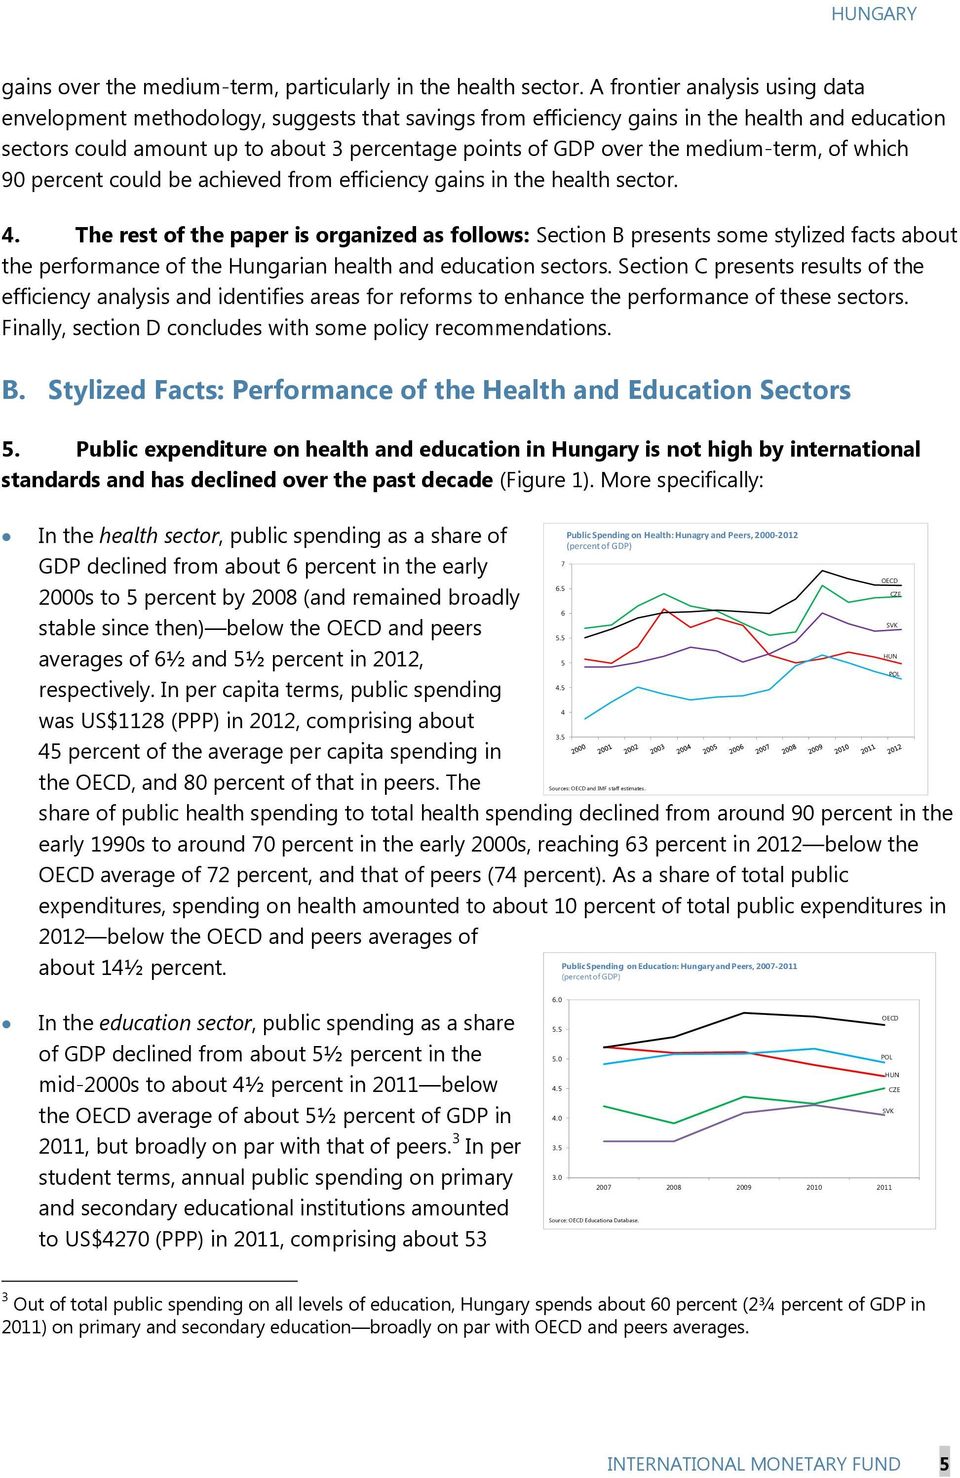 medium-term, of which 9 percent could be achieved from efficiency gains in the health sector. 4.